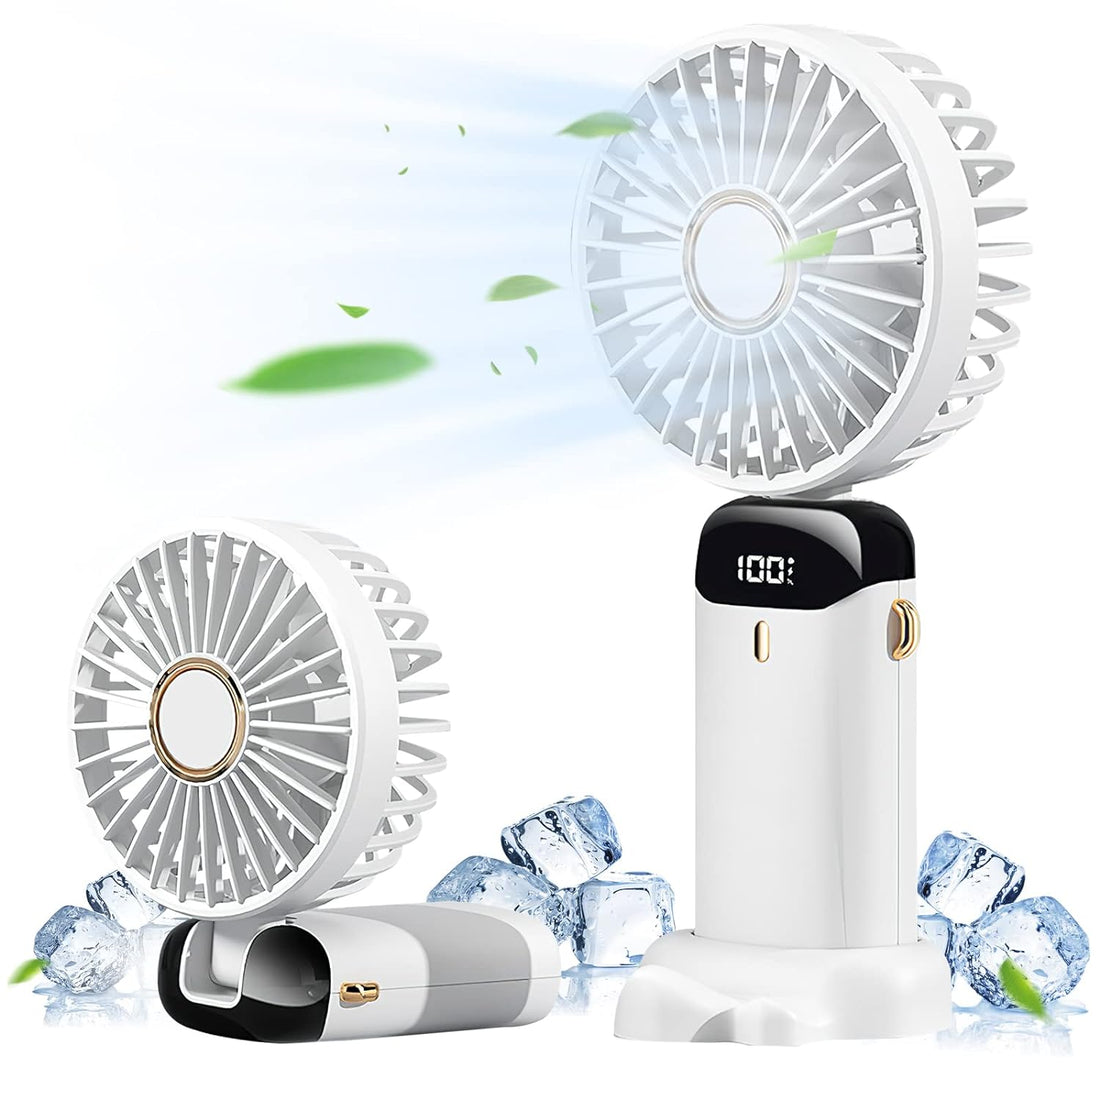 Portable Fan, Handheld Fan Personal Fan 5000mAh Rechargeable with 5 Speeds, Battery Operated Mini Fan with LED Display, 11-21Hs Desk Fan Working Time for Office Bedroom Outdoor Travel Camping-White